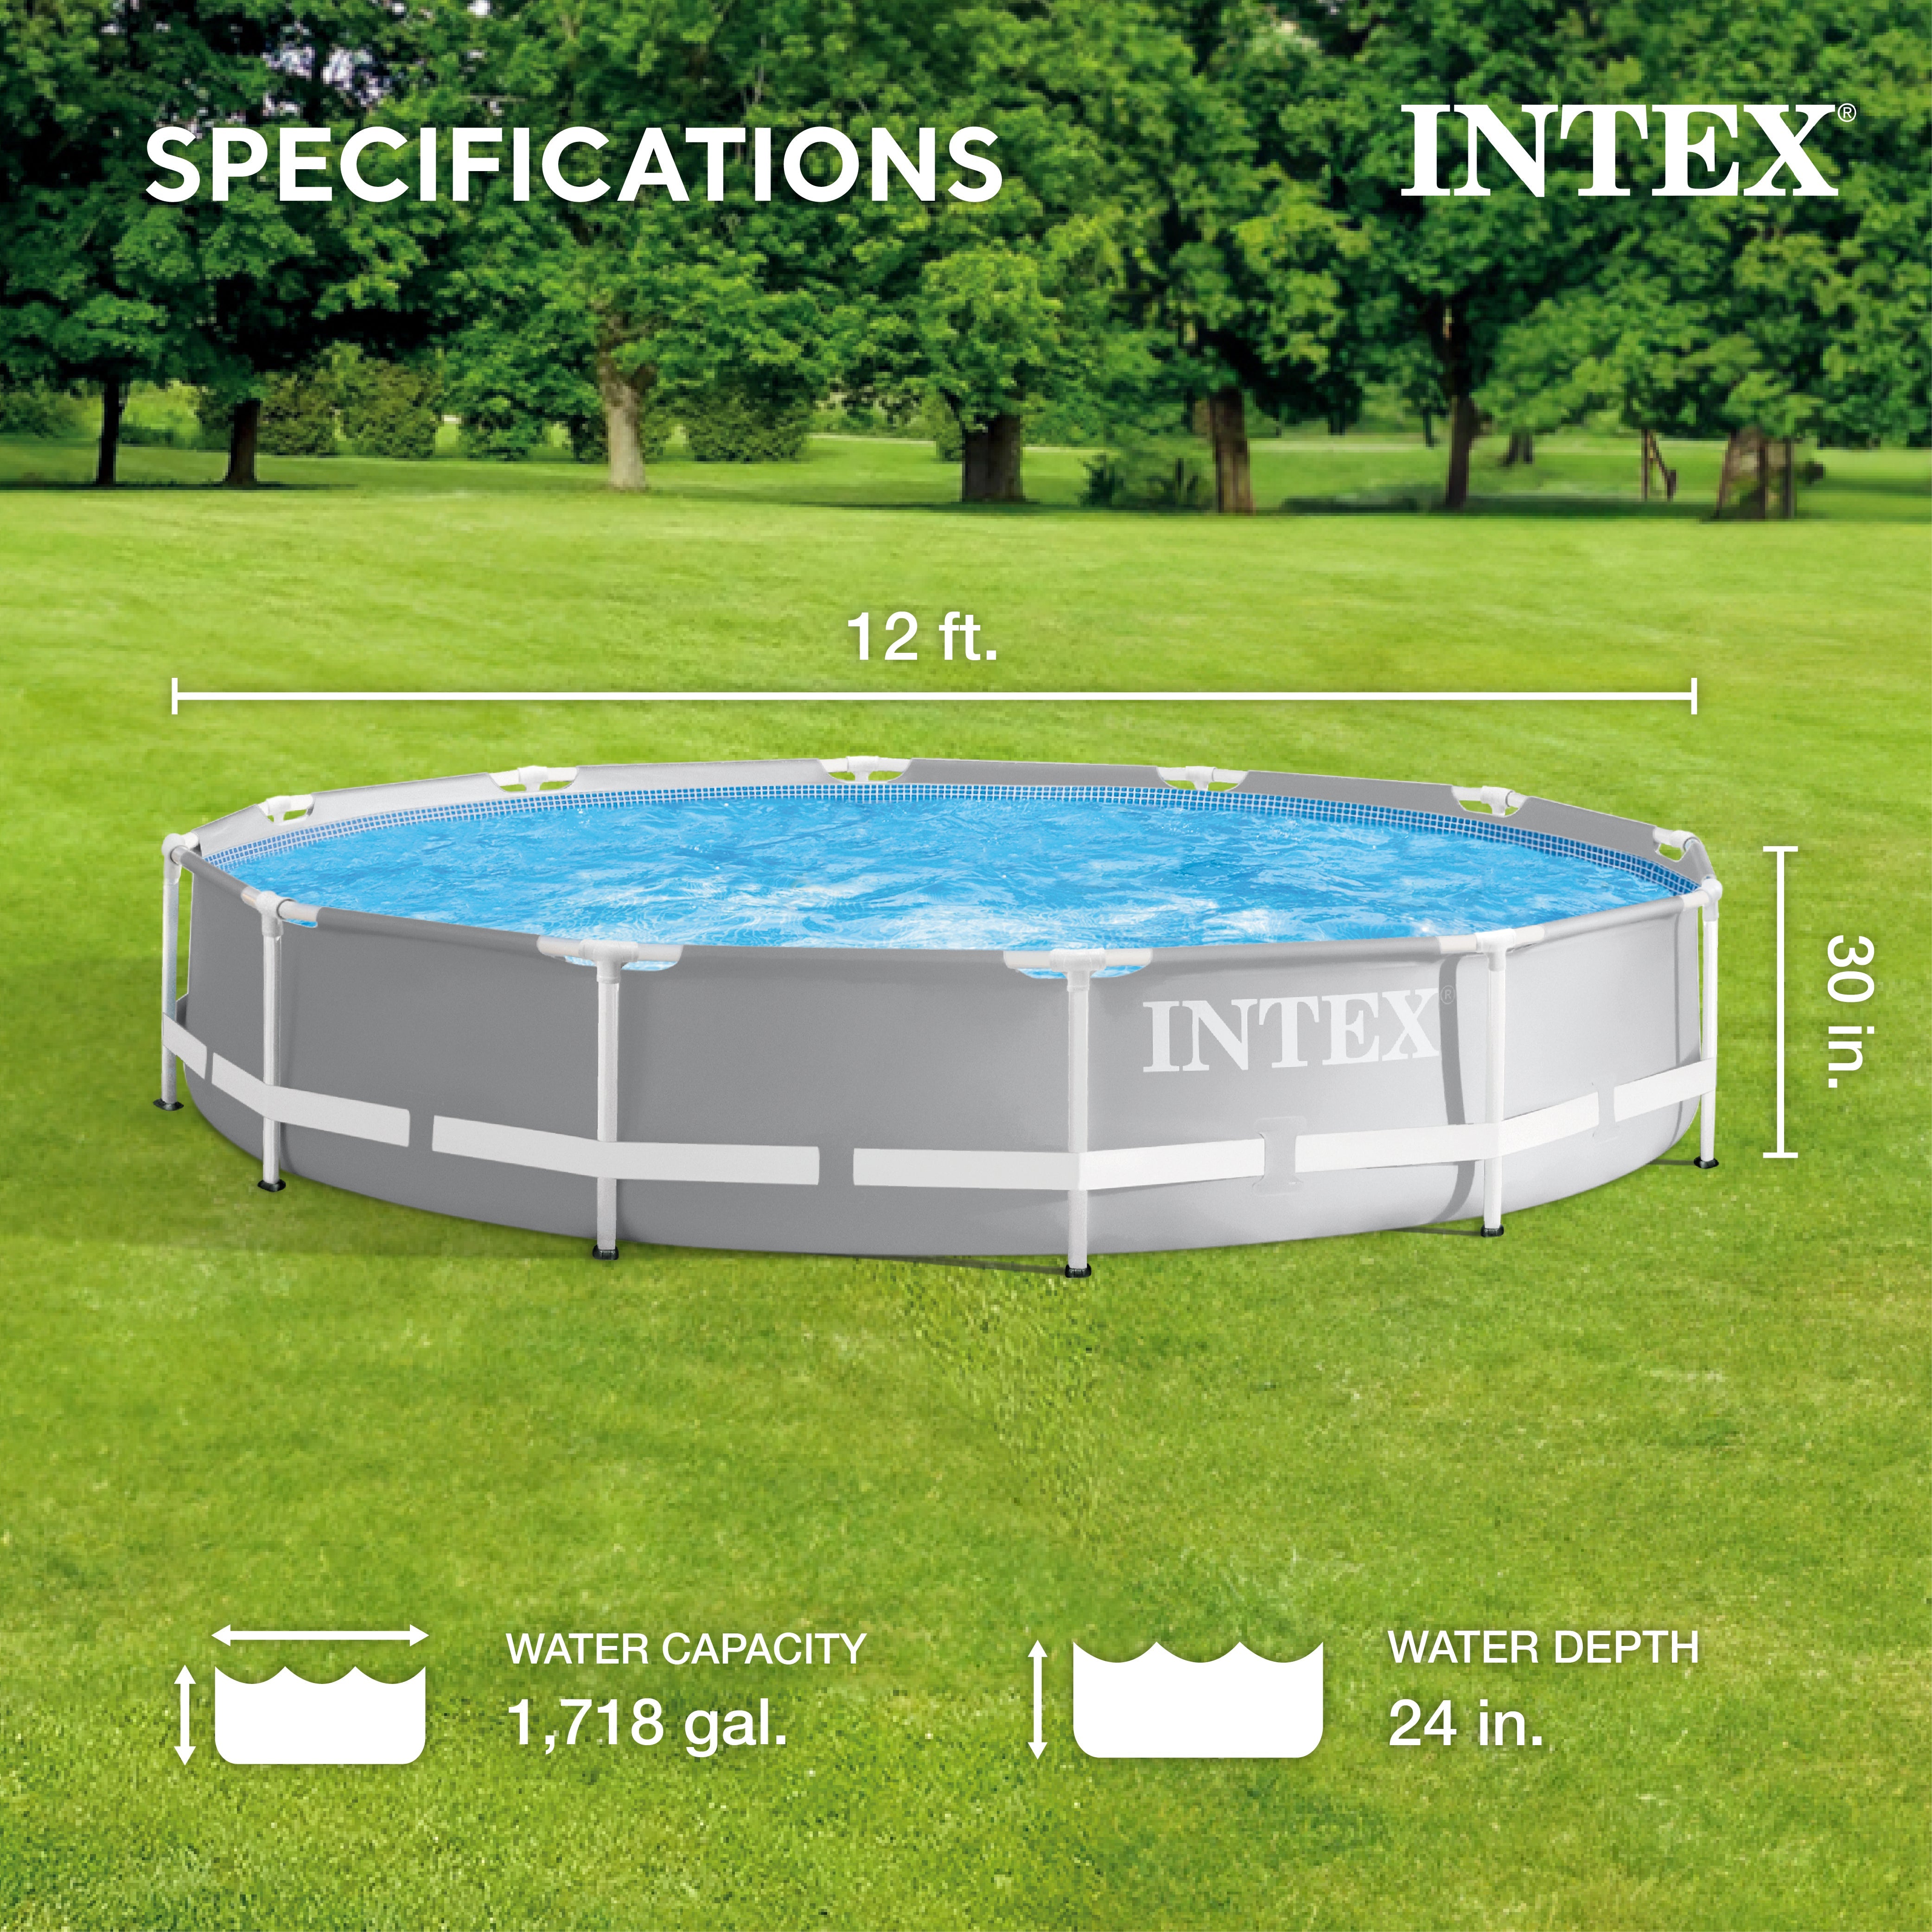 Intex-26711EH-12-foot-x-30-inch-Prism-Frame-Above-Ground-Swimming-Pool-with-Pump-Swimming-Pools